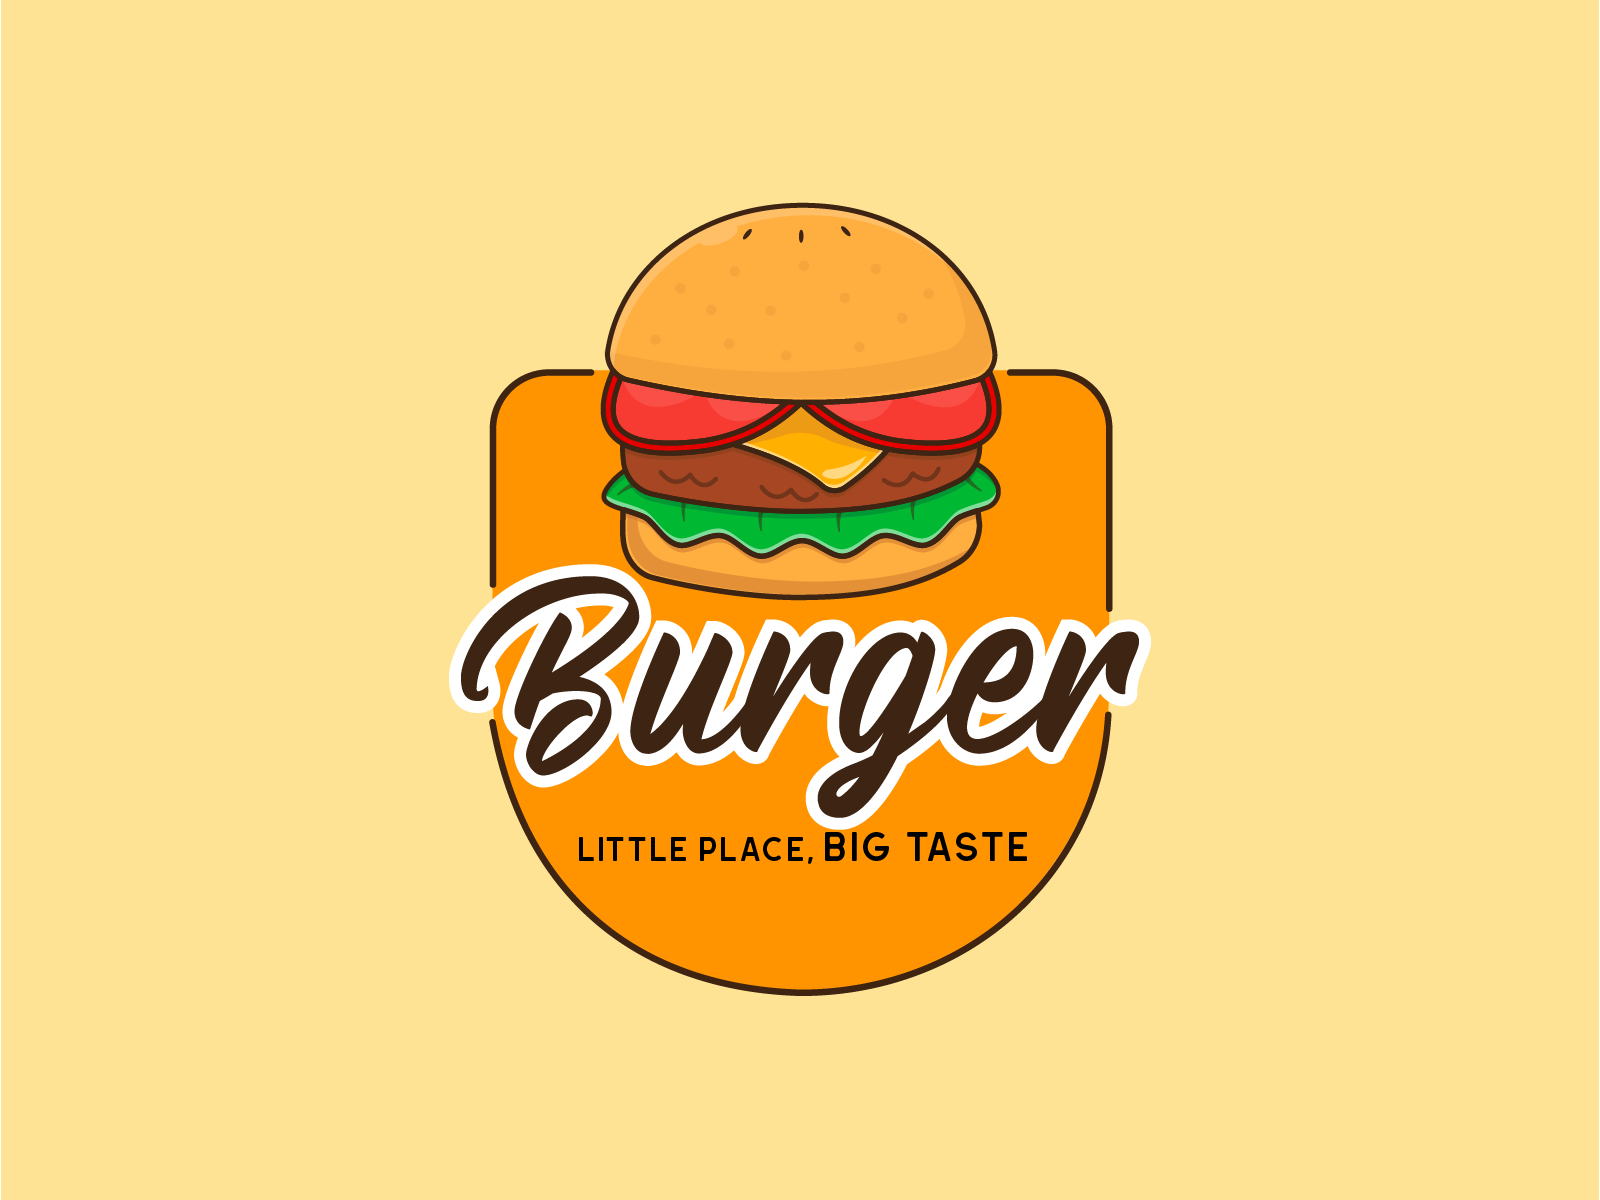 Burger - Badge Logo Concept by Pillow Leaf on Dribbble